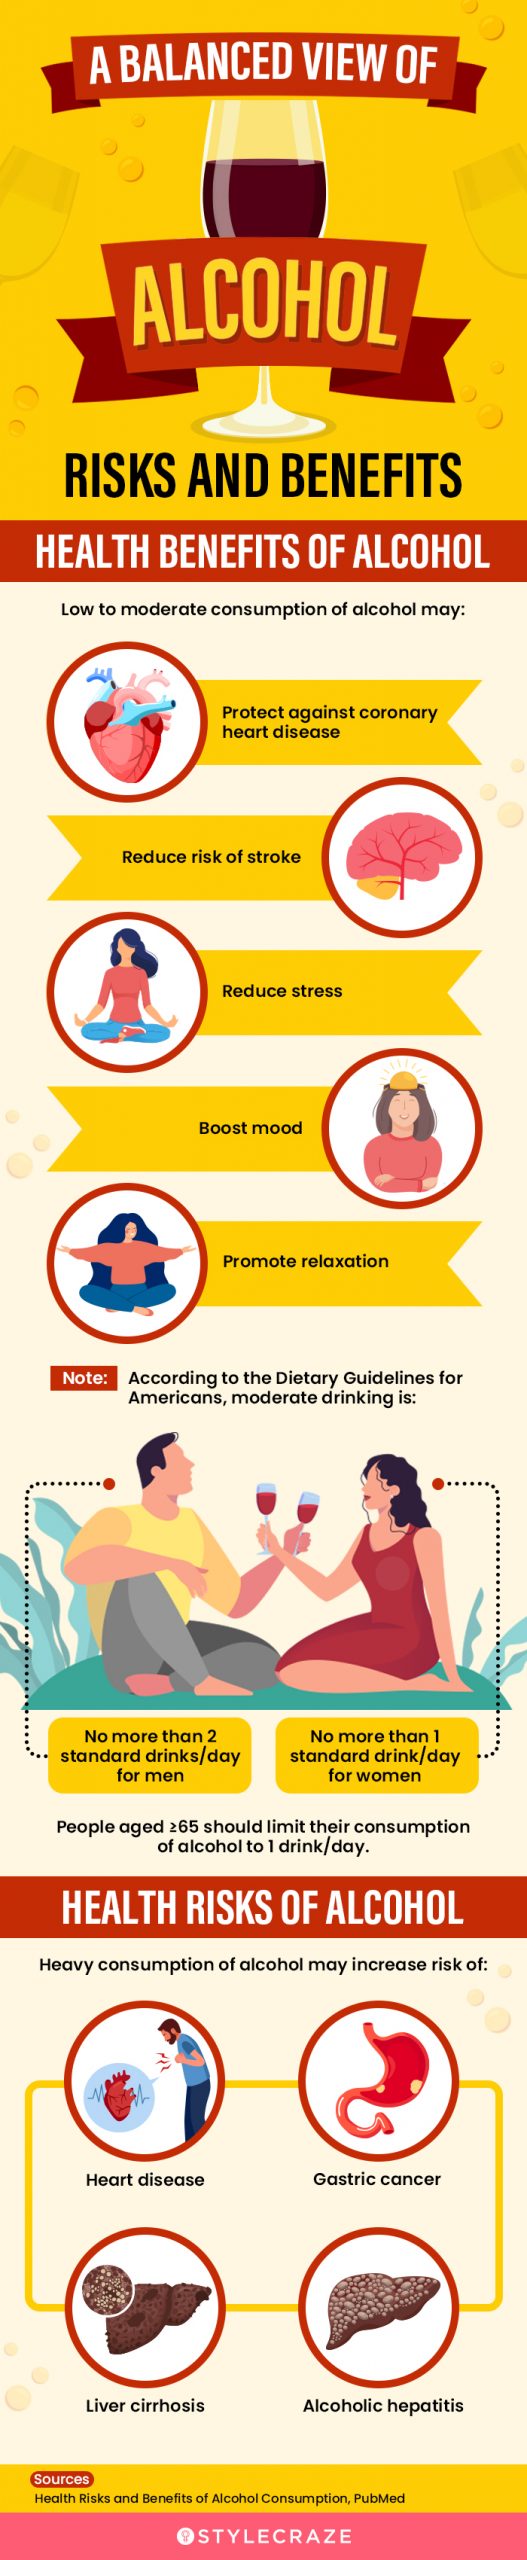 a balanced view of alcohol risks and benefits [infographic]